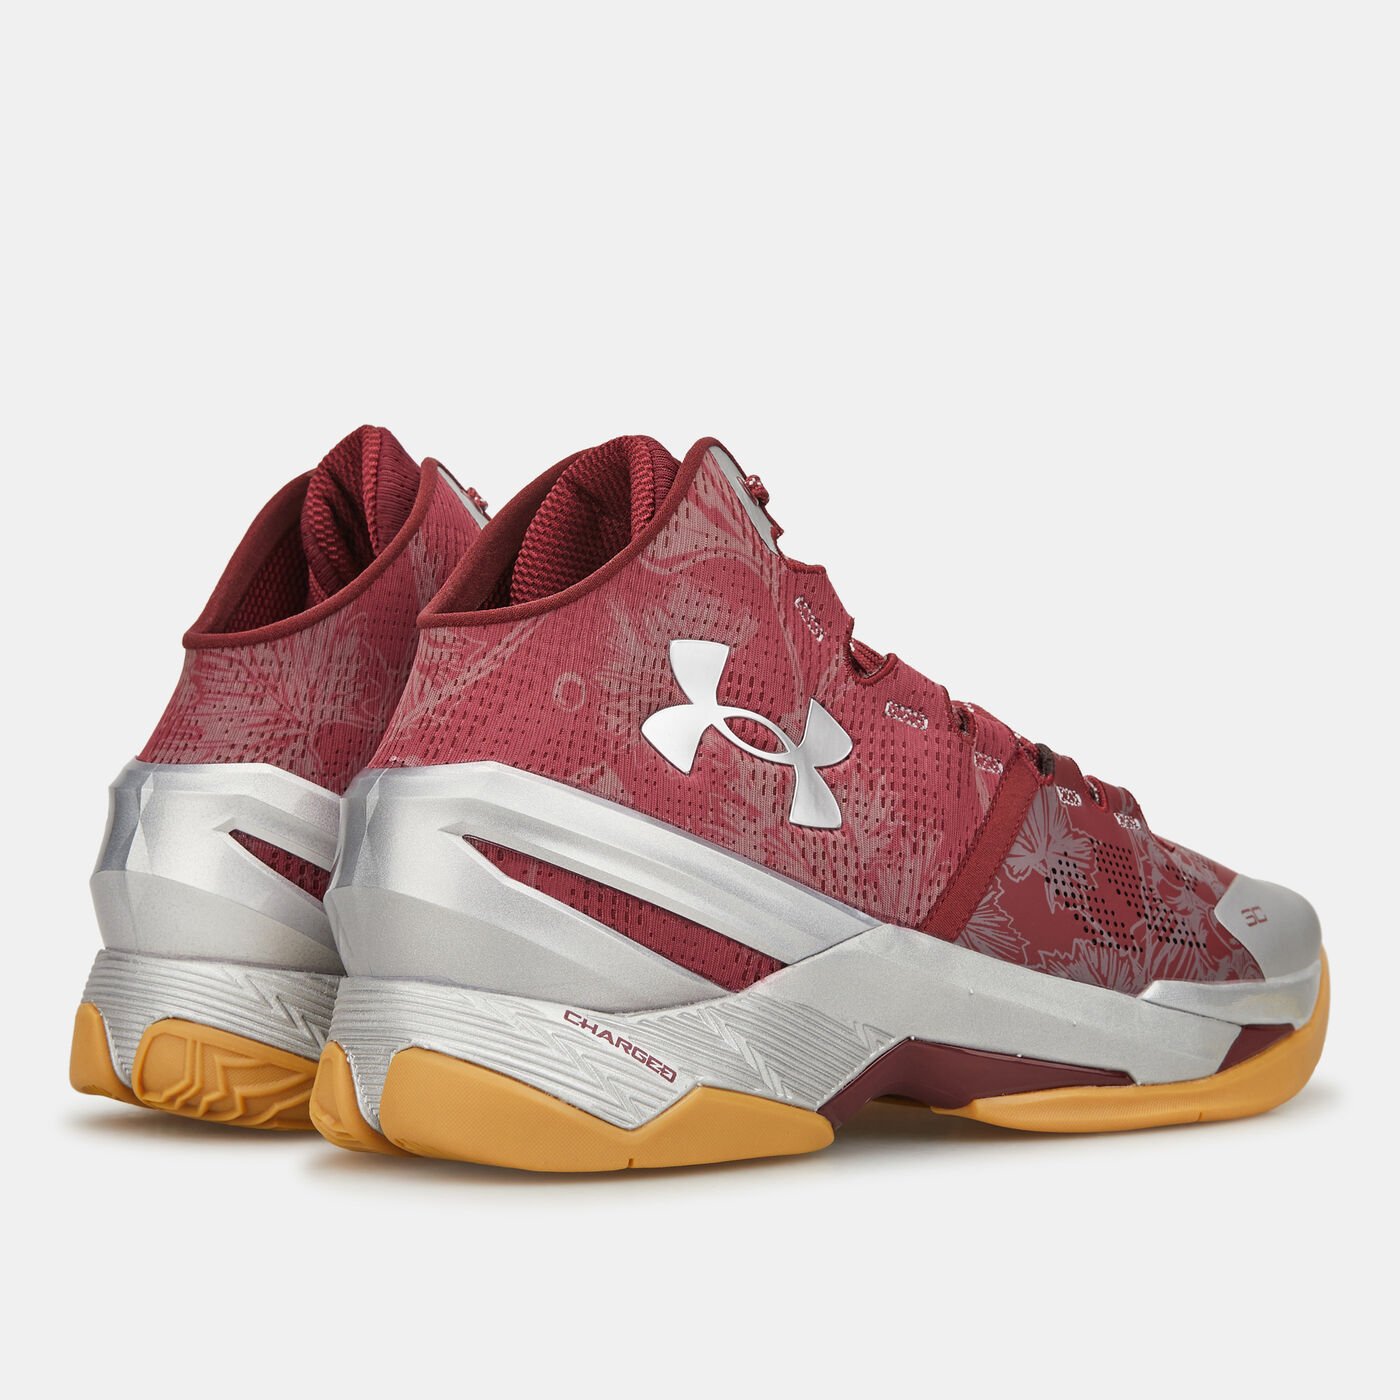 Curry 2 Basketball Shoes